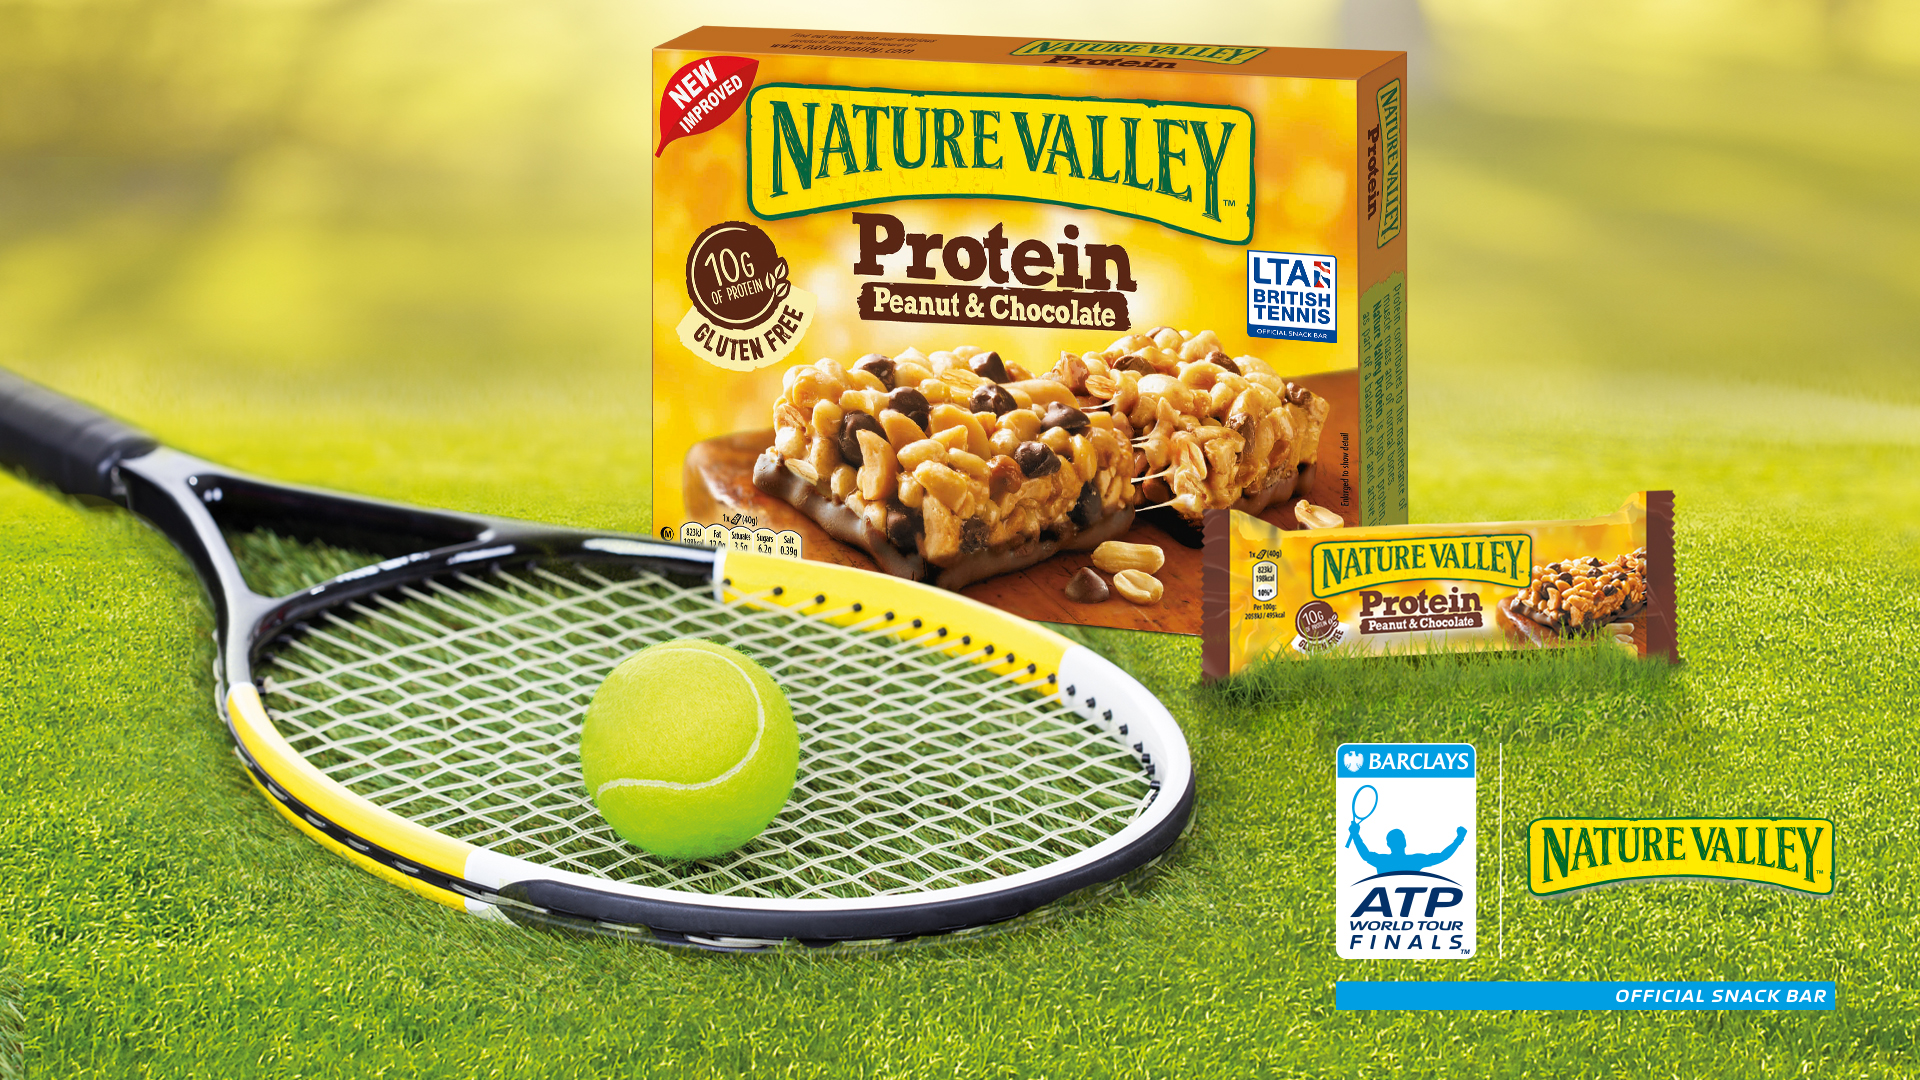 Nature Valley nets deal with Barclays ATP World Tour Finals